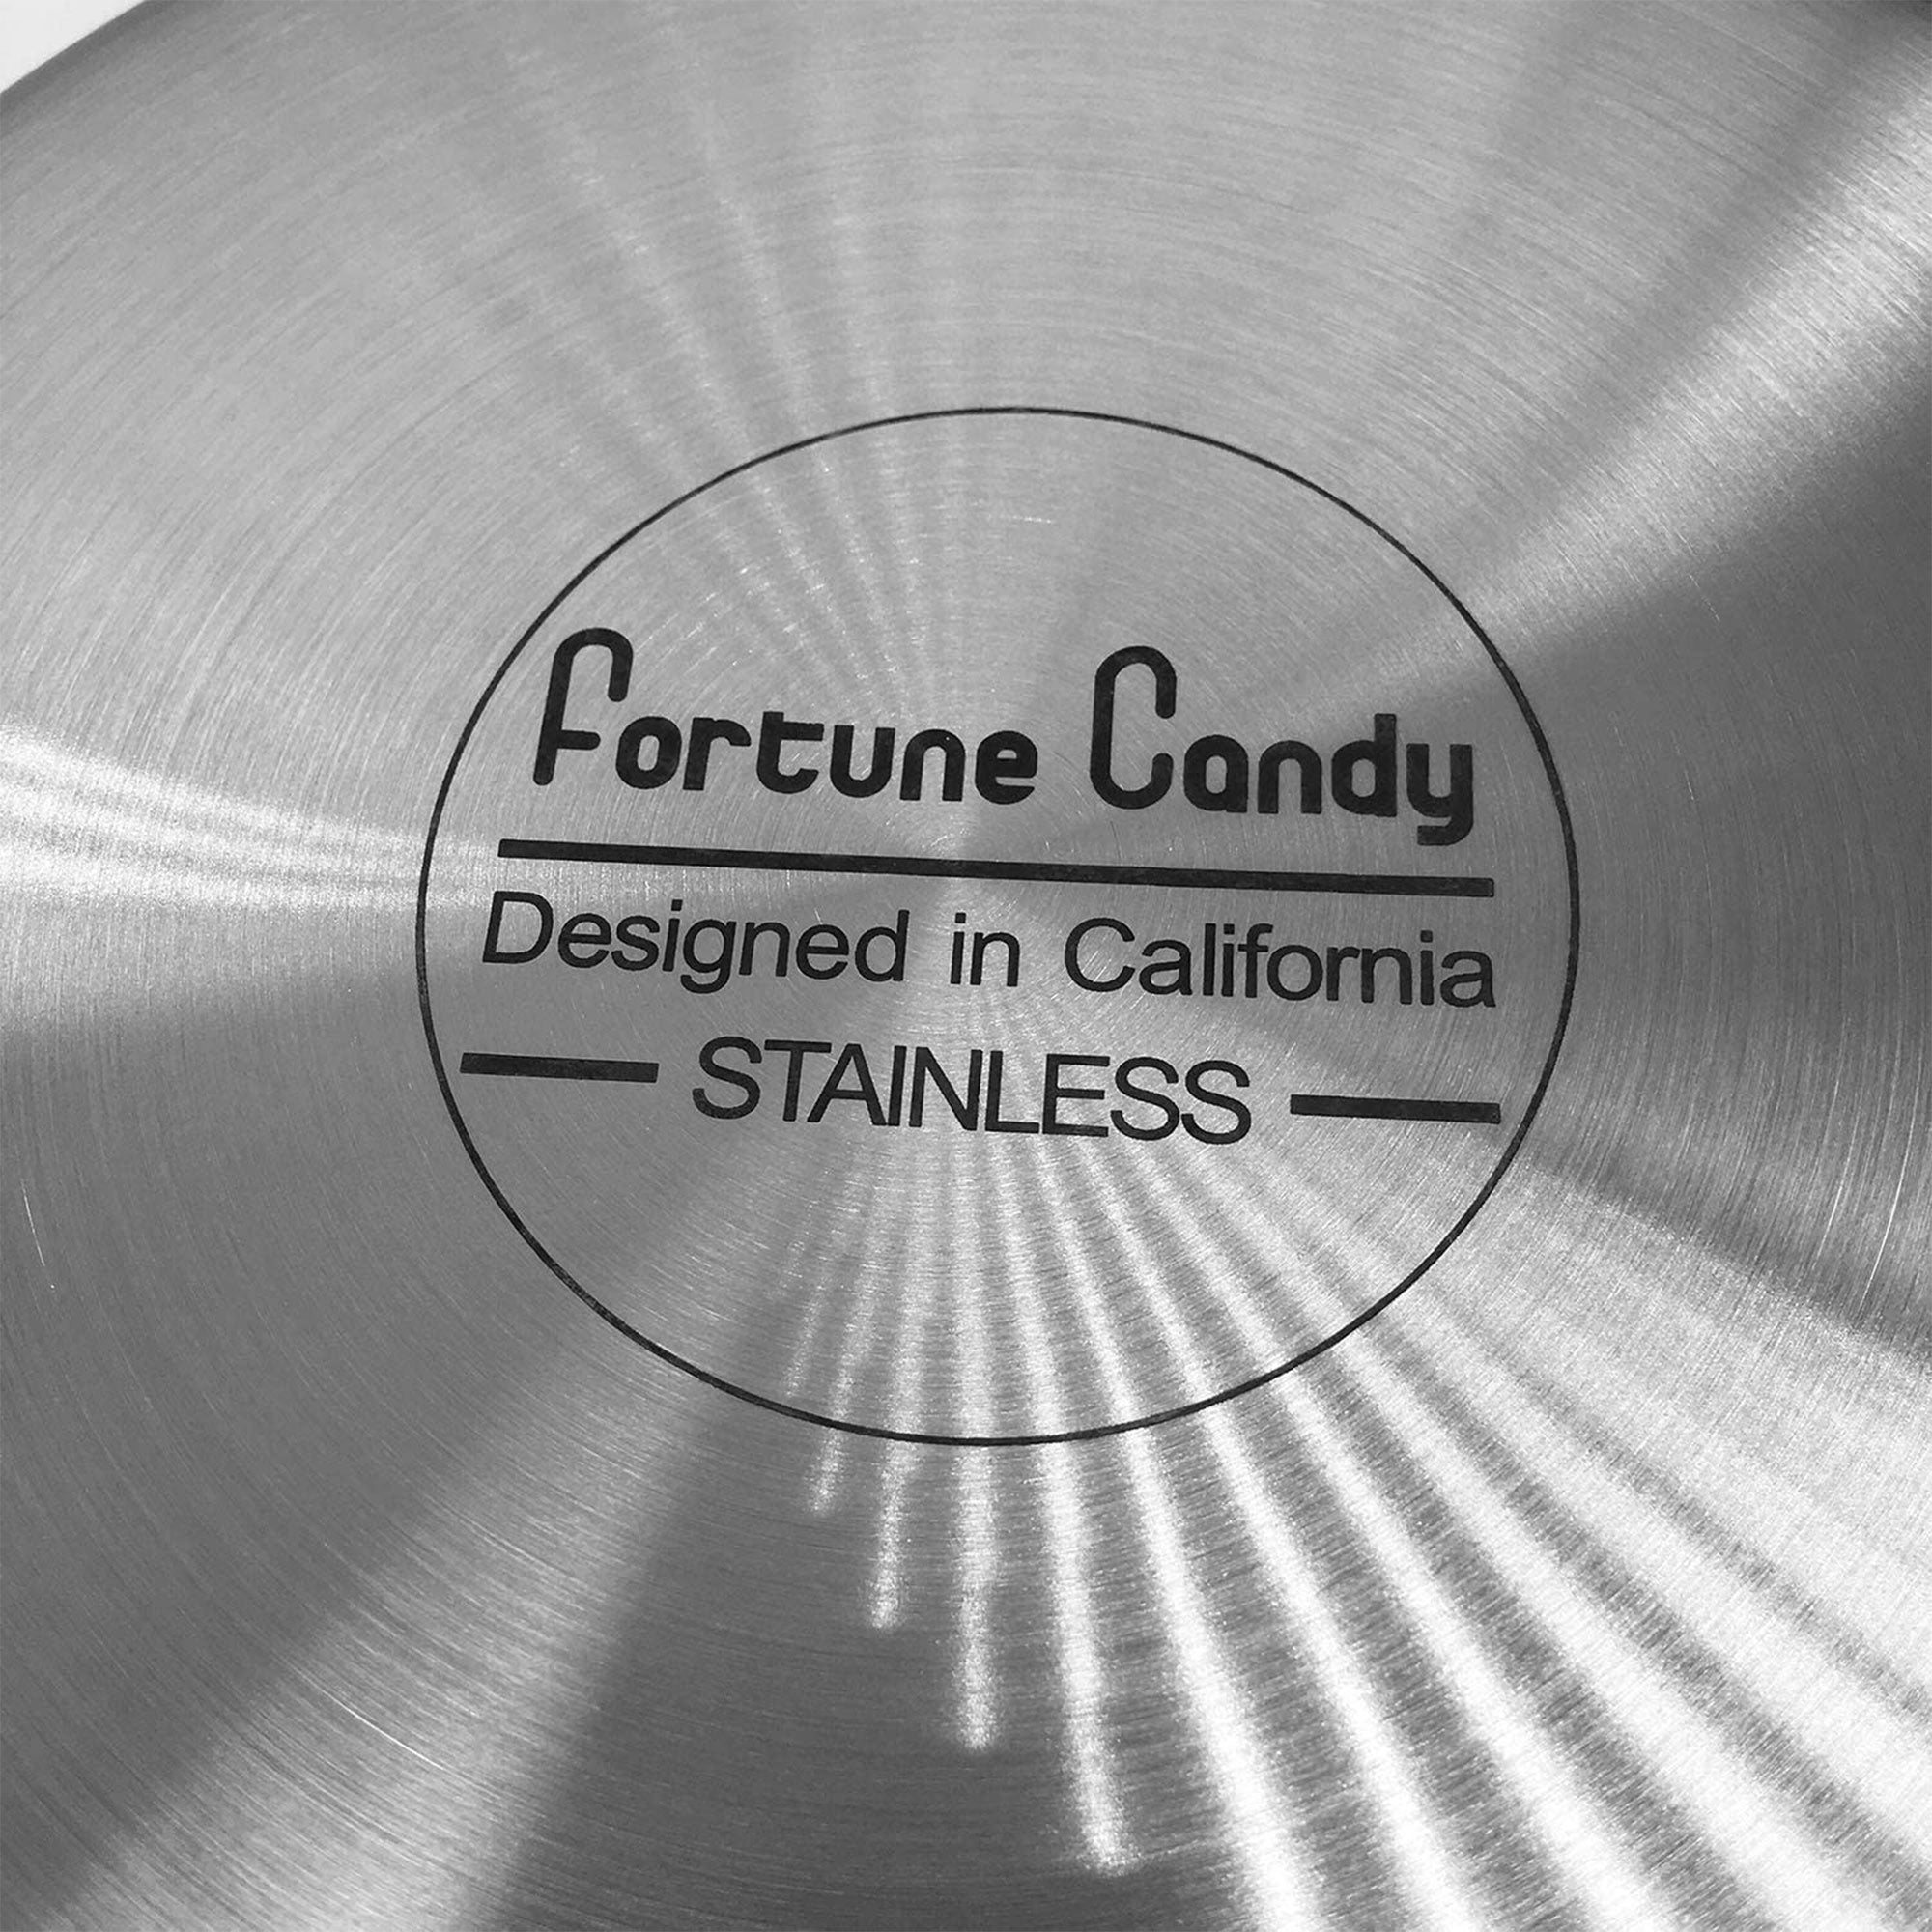 Fortune Candy Fry Pan with Lid, 3-Ply Skillet, 18/8 Stainless Steel, Induction Ready, Dishwasher Safe, Silver (8-inch)